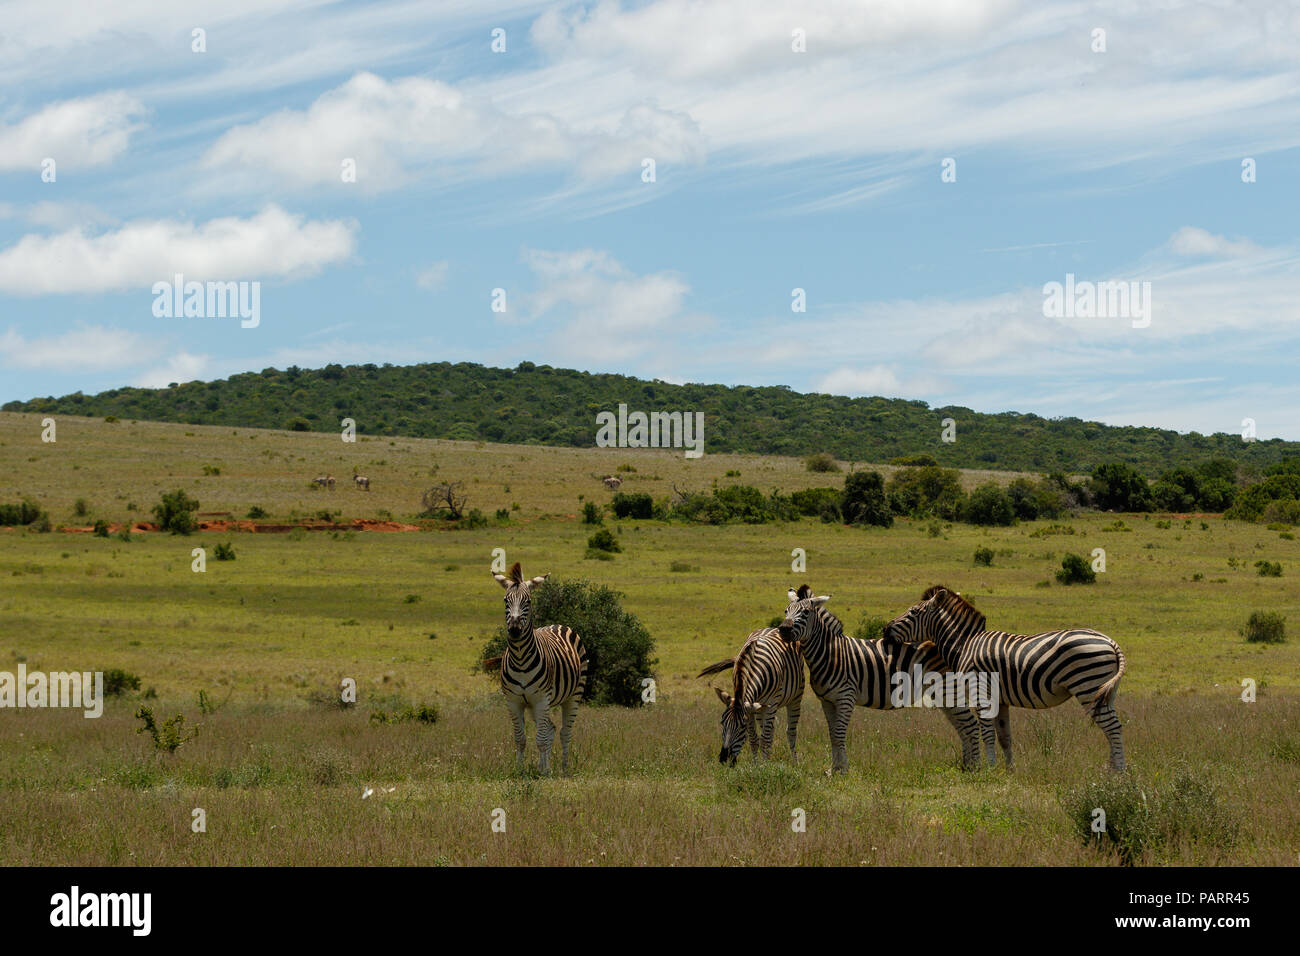 Zebras standing bunching together in the open field Stock Photo